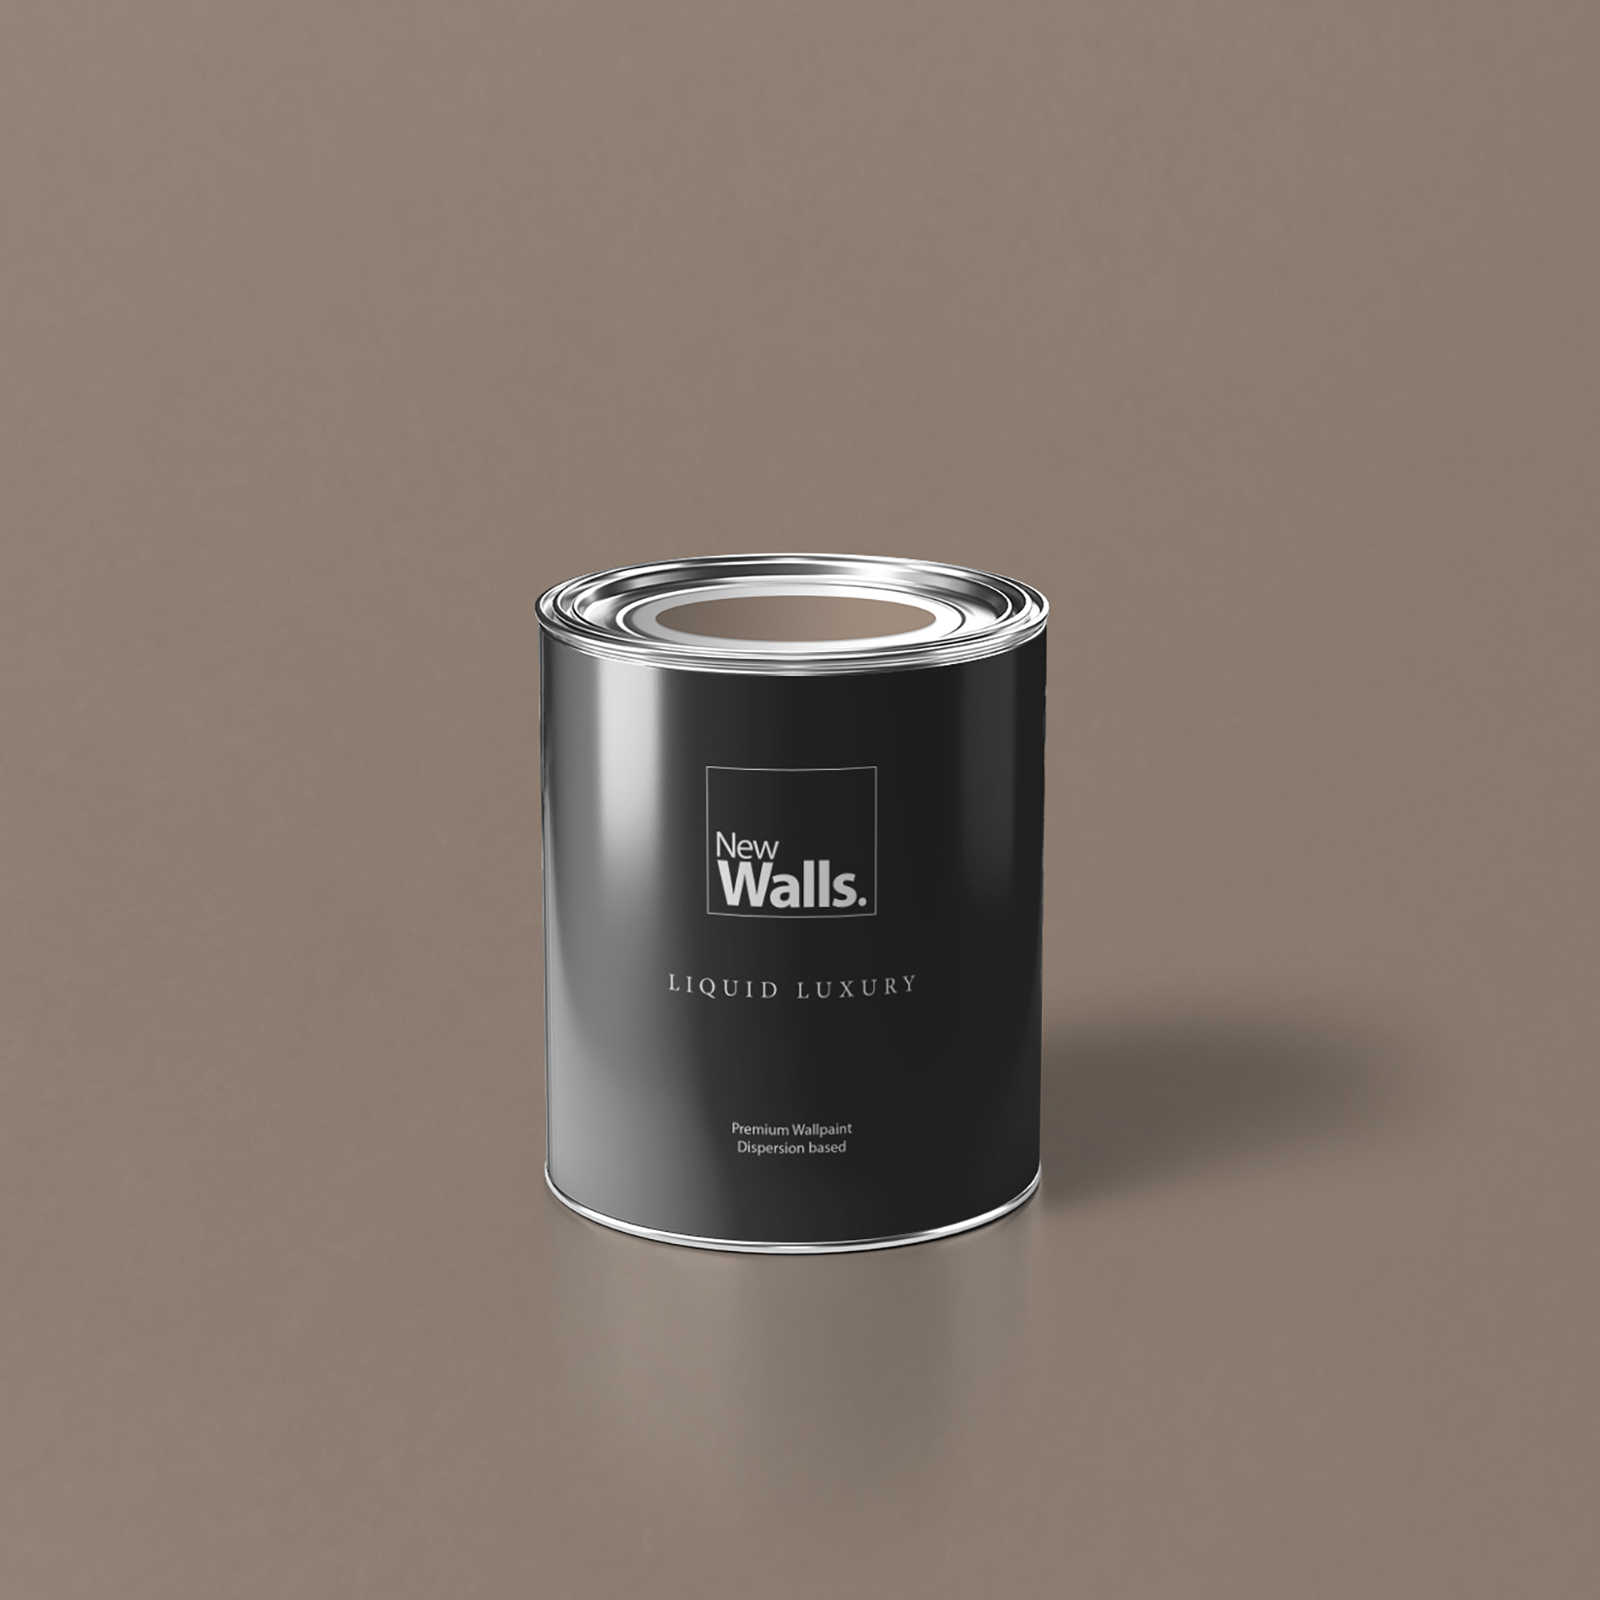         Premium Wall Paint Down-to-earth Taupe »Talented calm taupe« NW702 – 1 litre
    